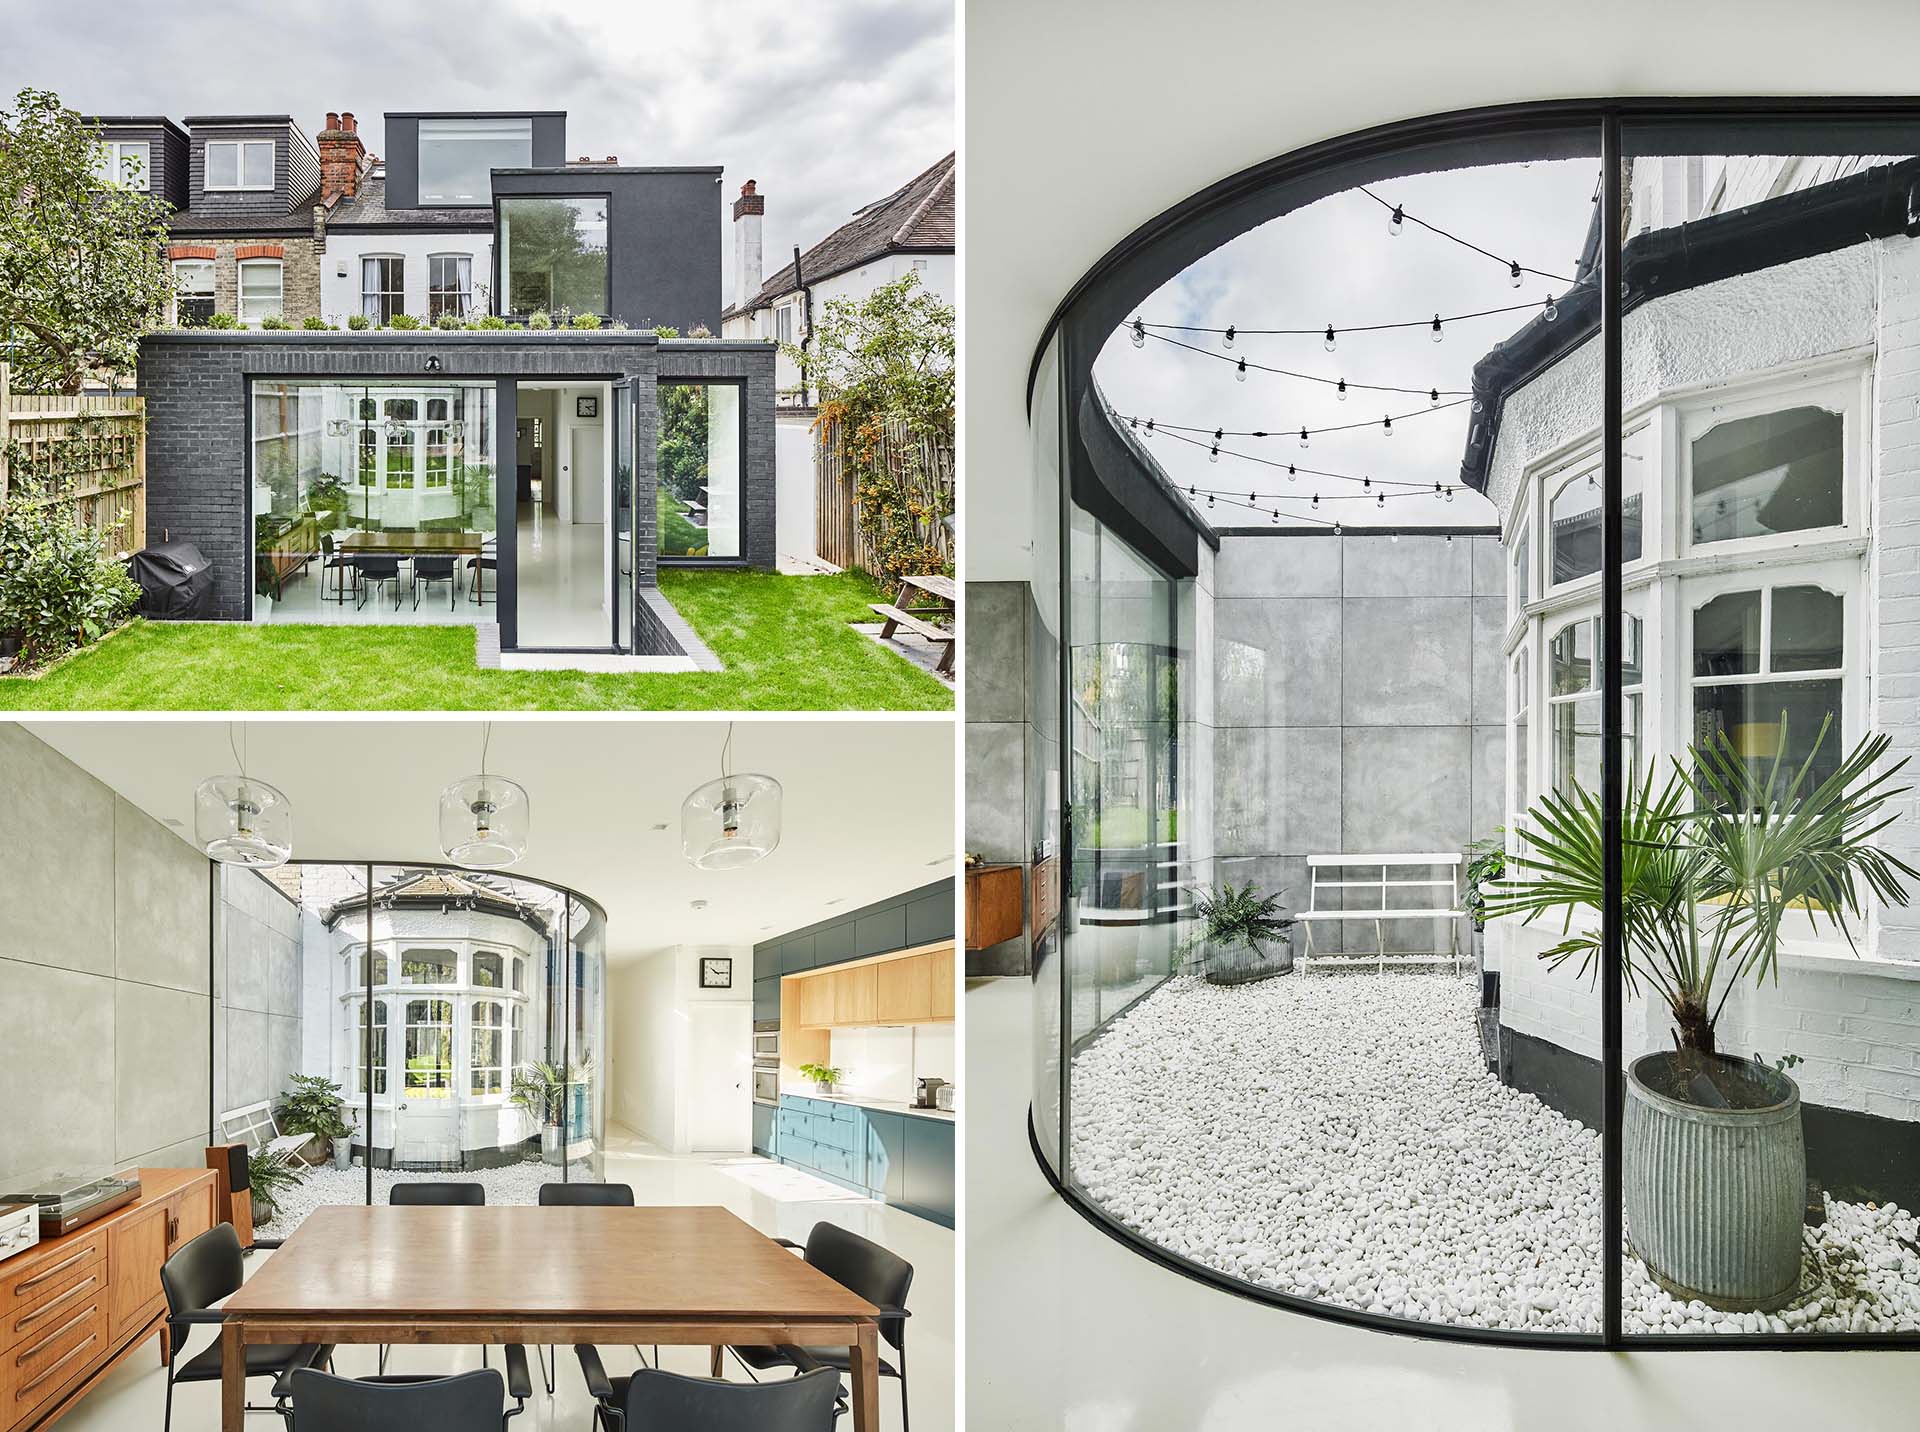 A modern rear extension with a curved window creates space for a small courtyard and protects the original bay window.